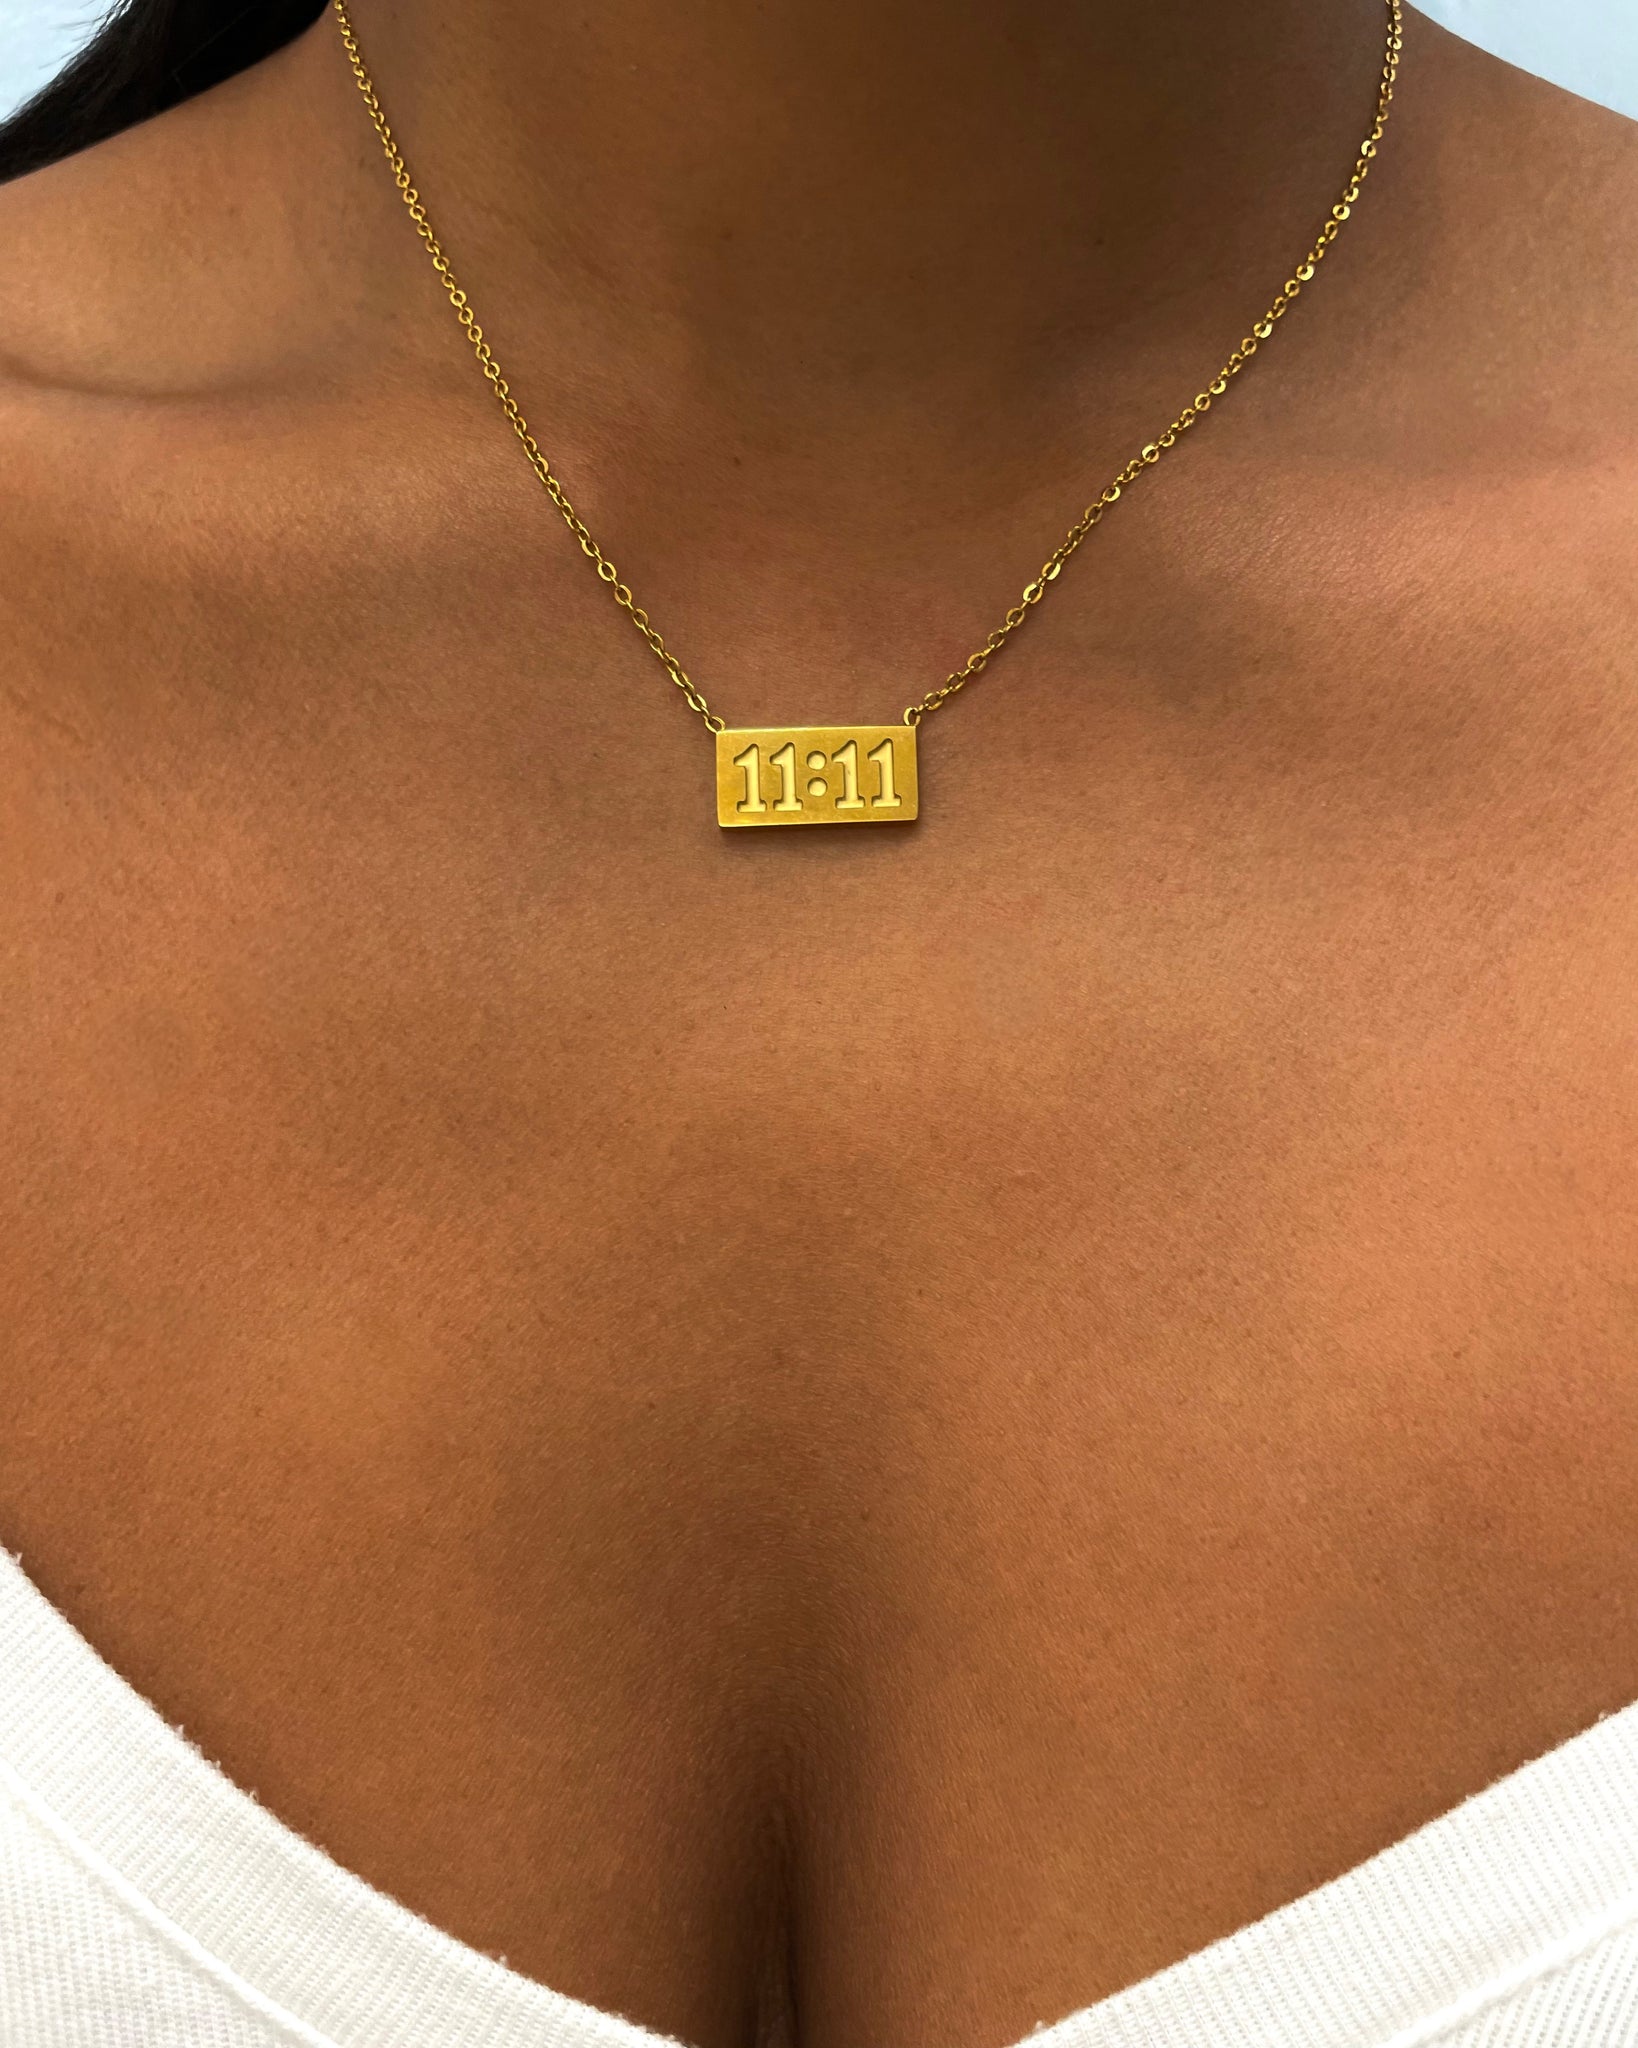 11:11 Necklace {view}